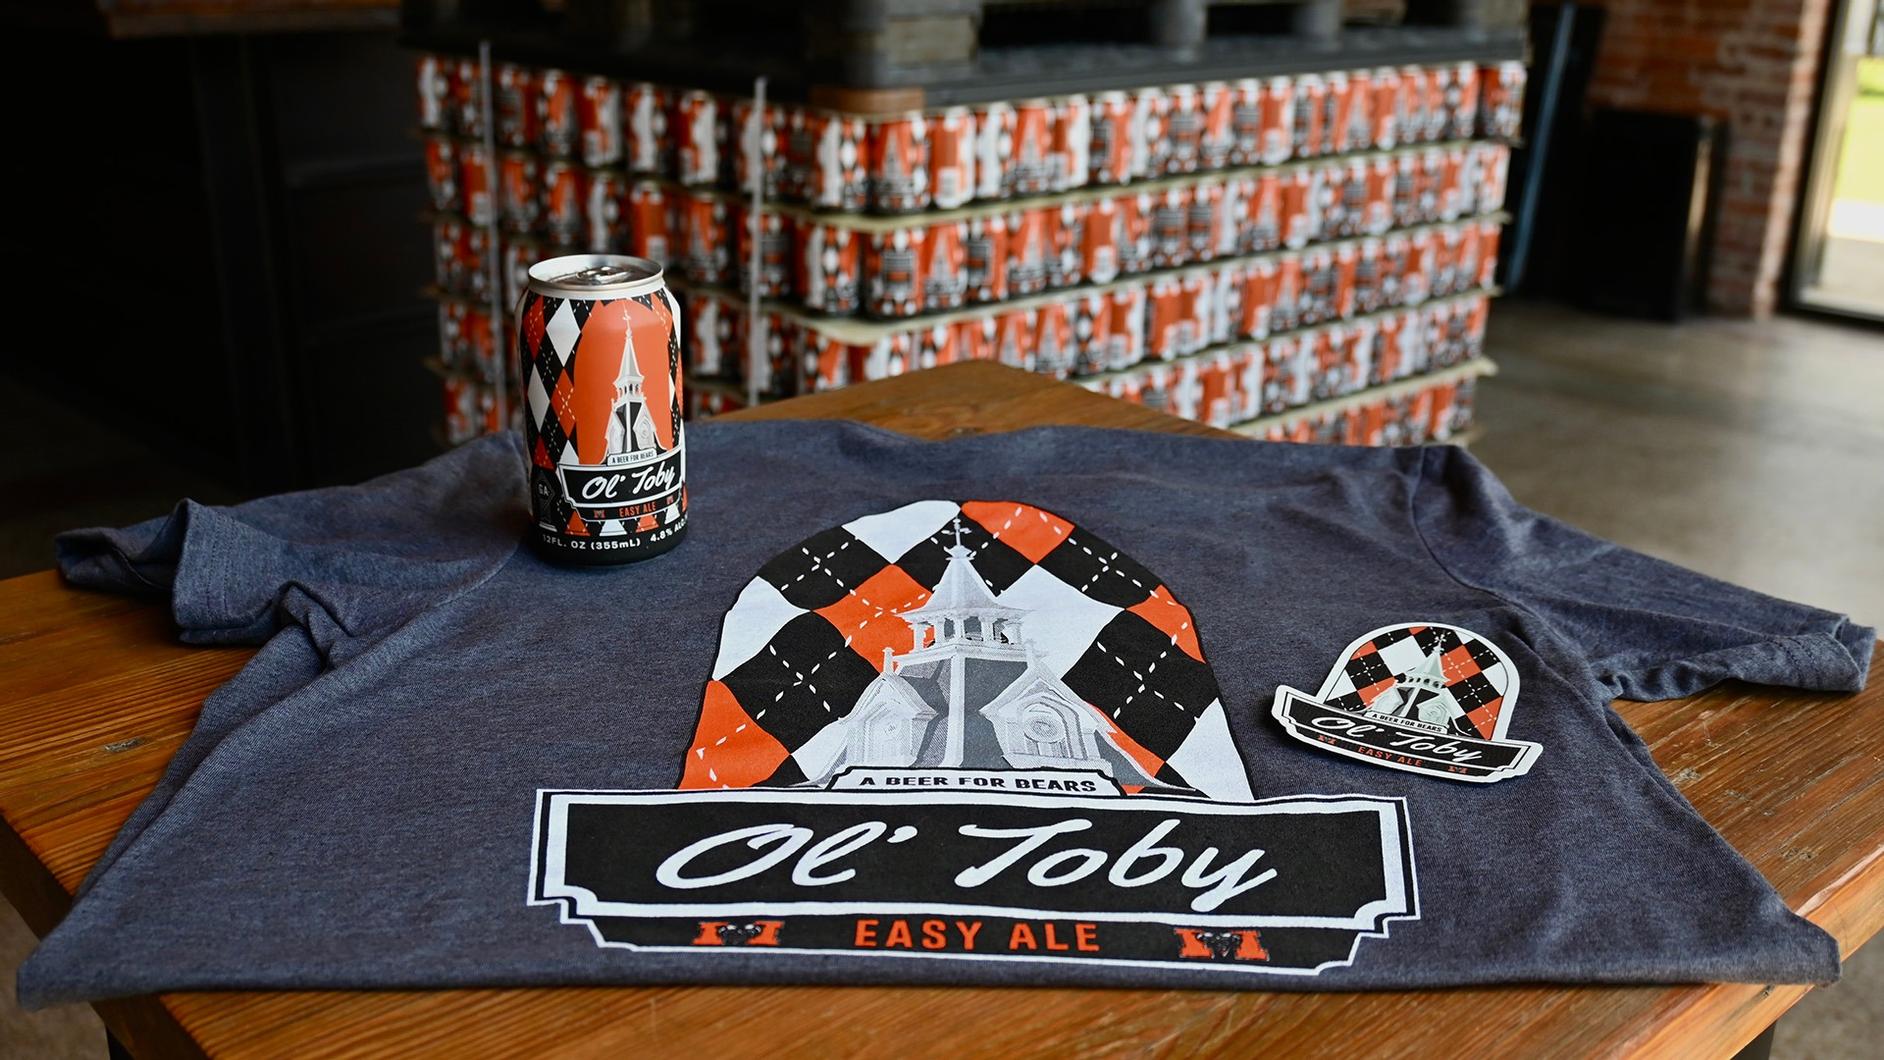 Fall Line to debut Ol\' Toby Easy Ale on Sept. 9